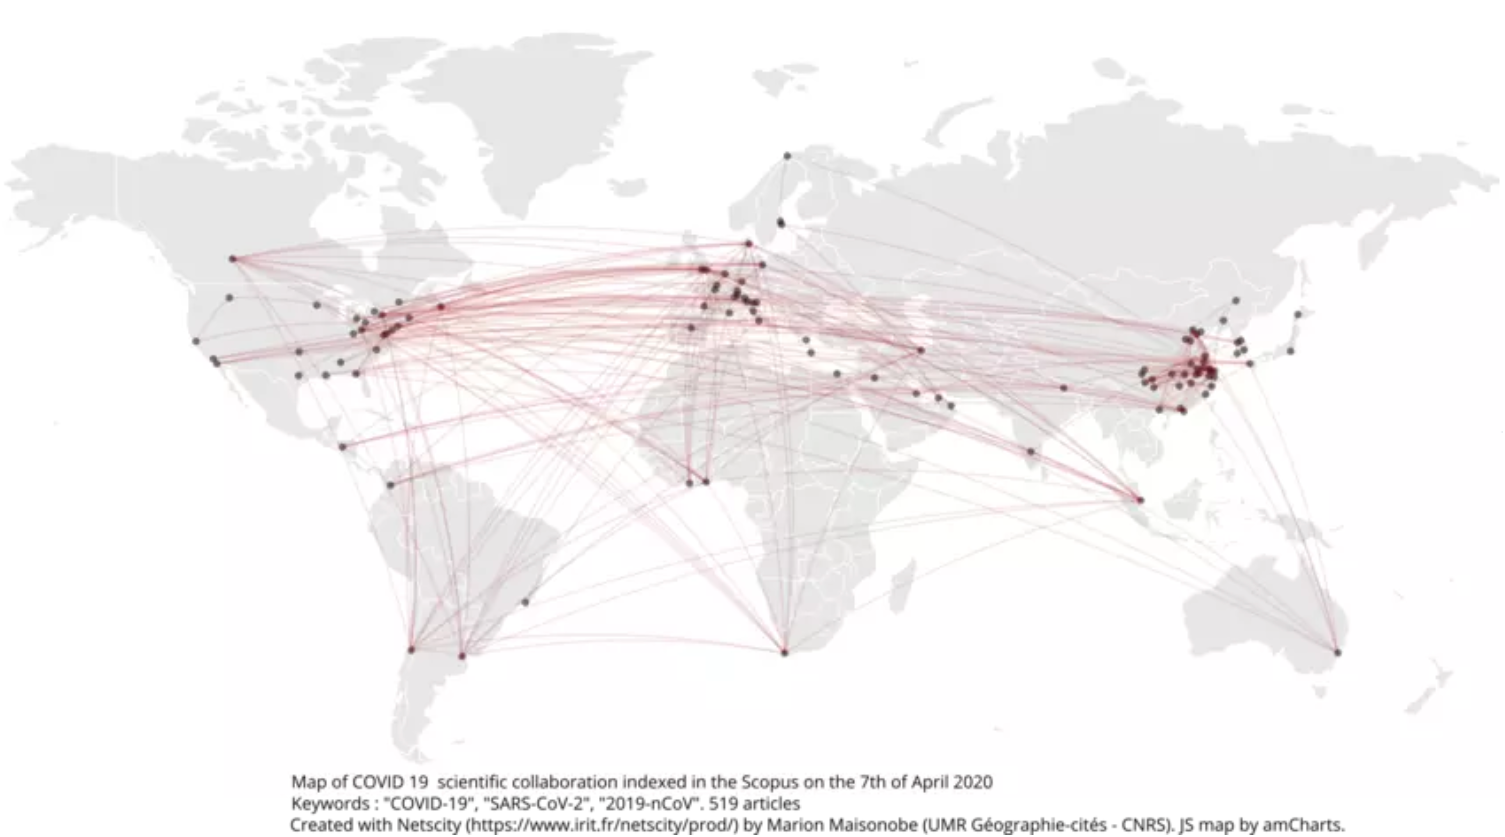 Map of Covid-19 scientific collaboration indexed in the Scopus on the 7th April 2020